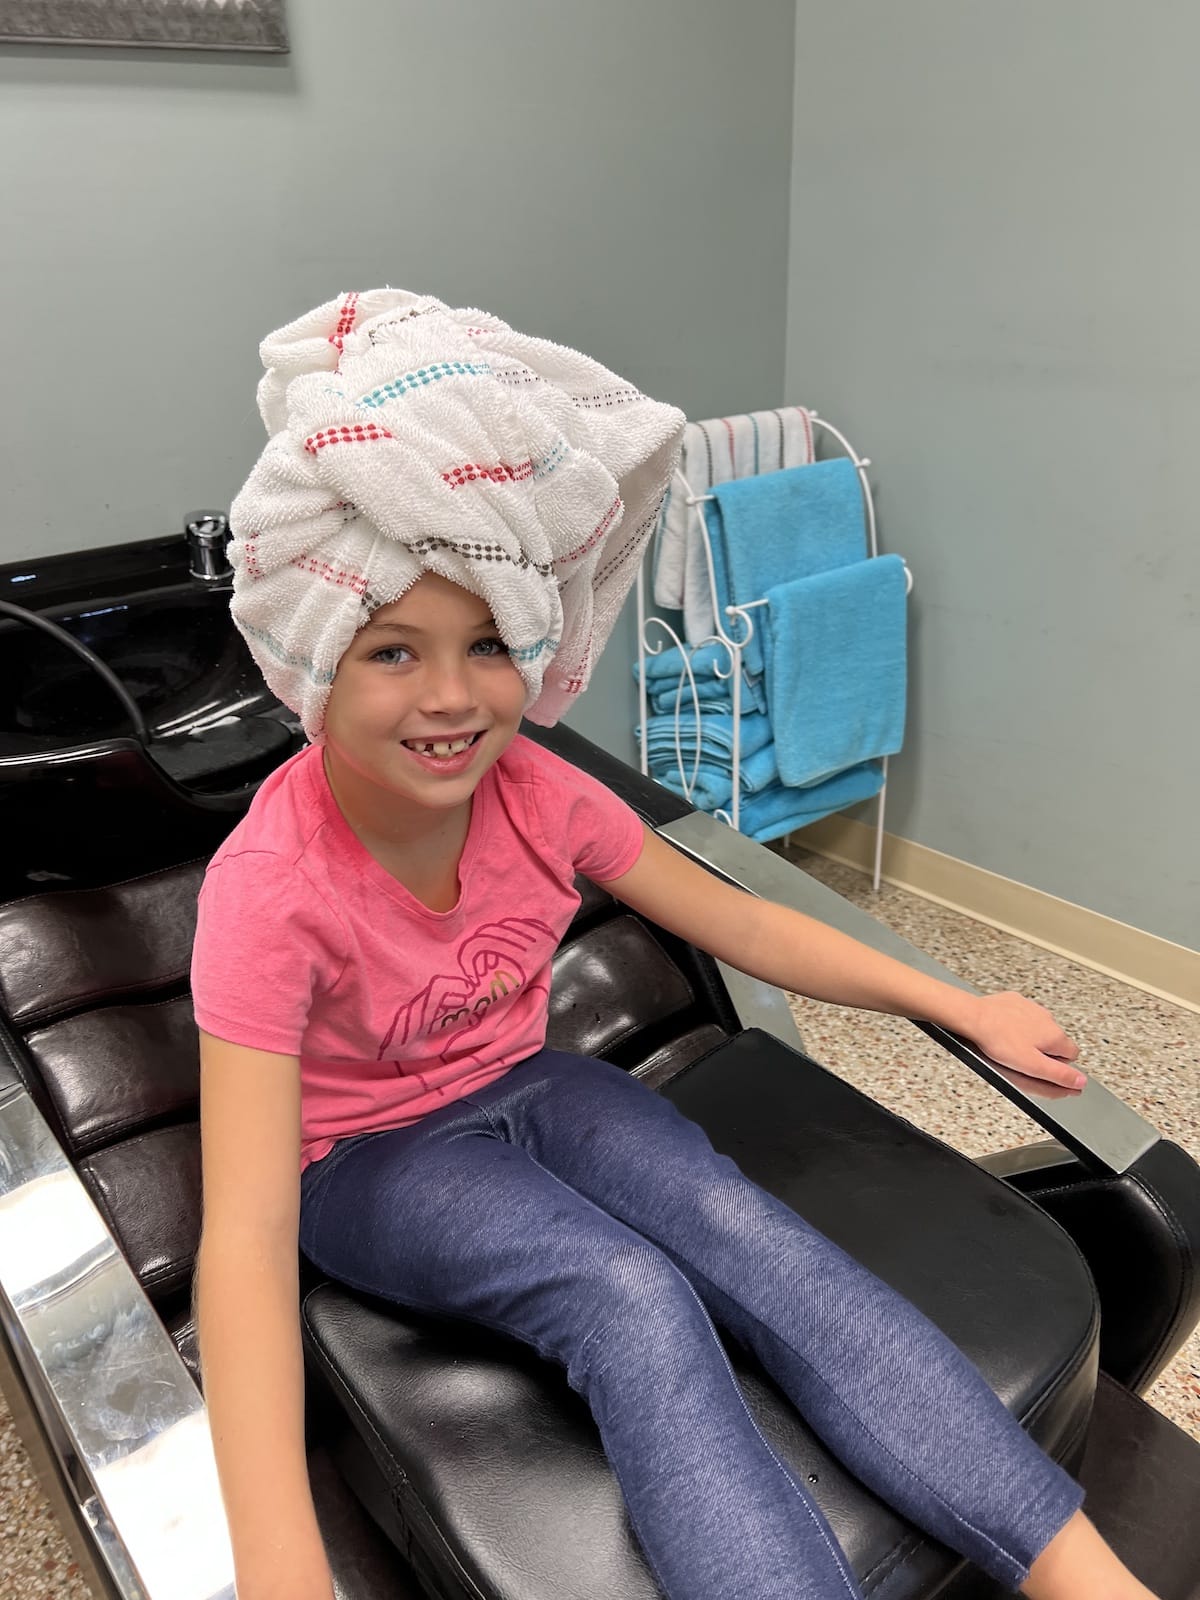 Lice treatment for kids: How to clean your house after lice as well as how to clean brushes with lice to prevent lice in the future.  